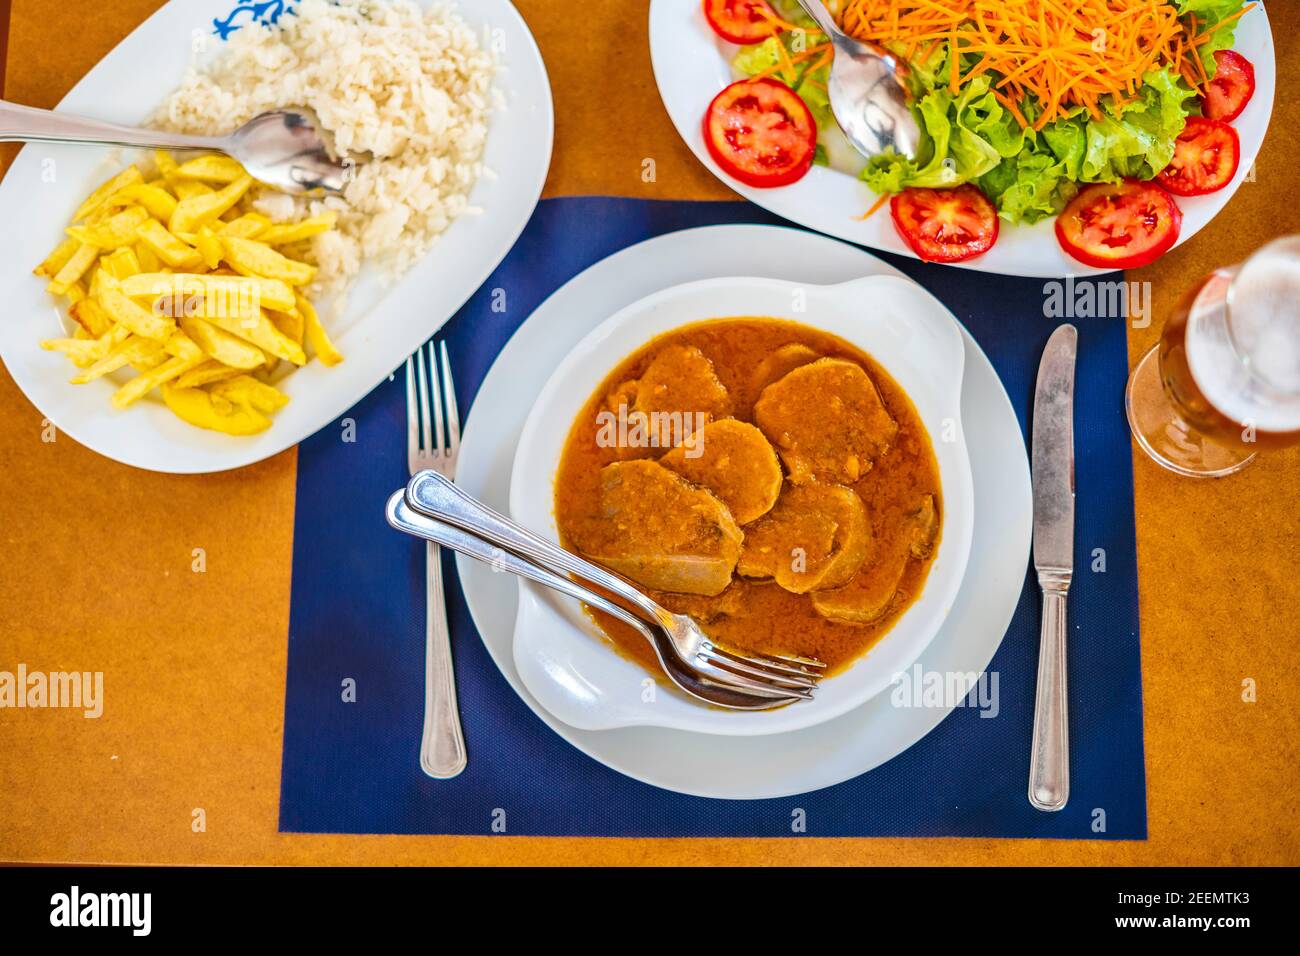 Traditional food from Alentejo - cow's tongue in a sauce served with salad, rice and french fries, Portugal, Europe Stock Photo